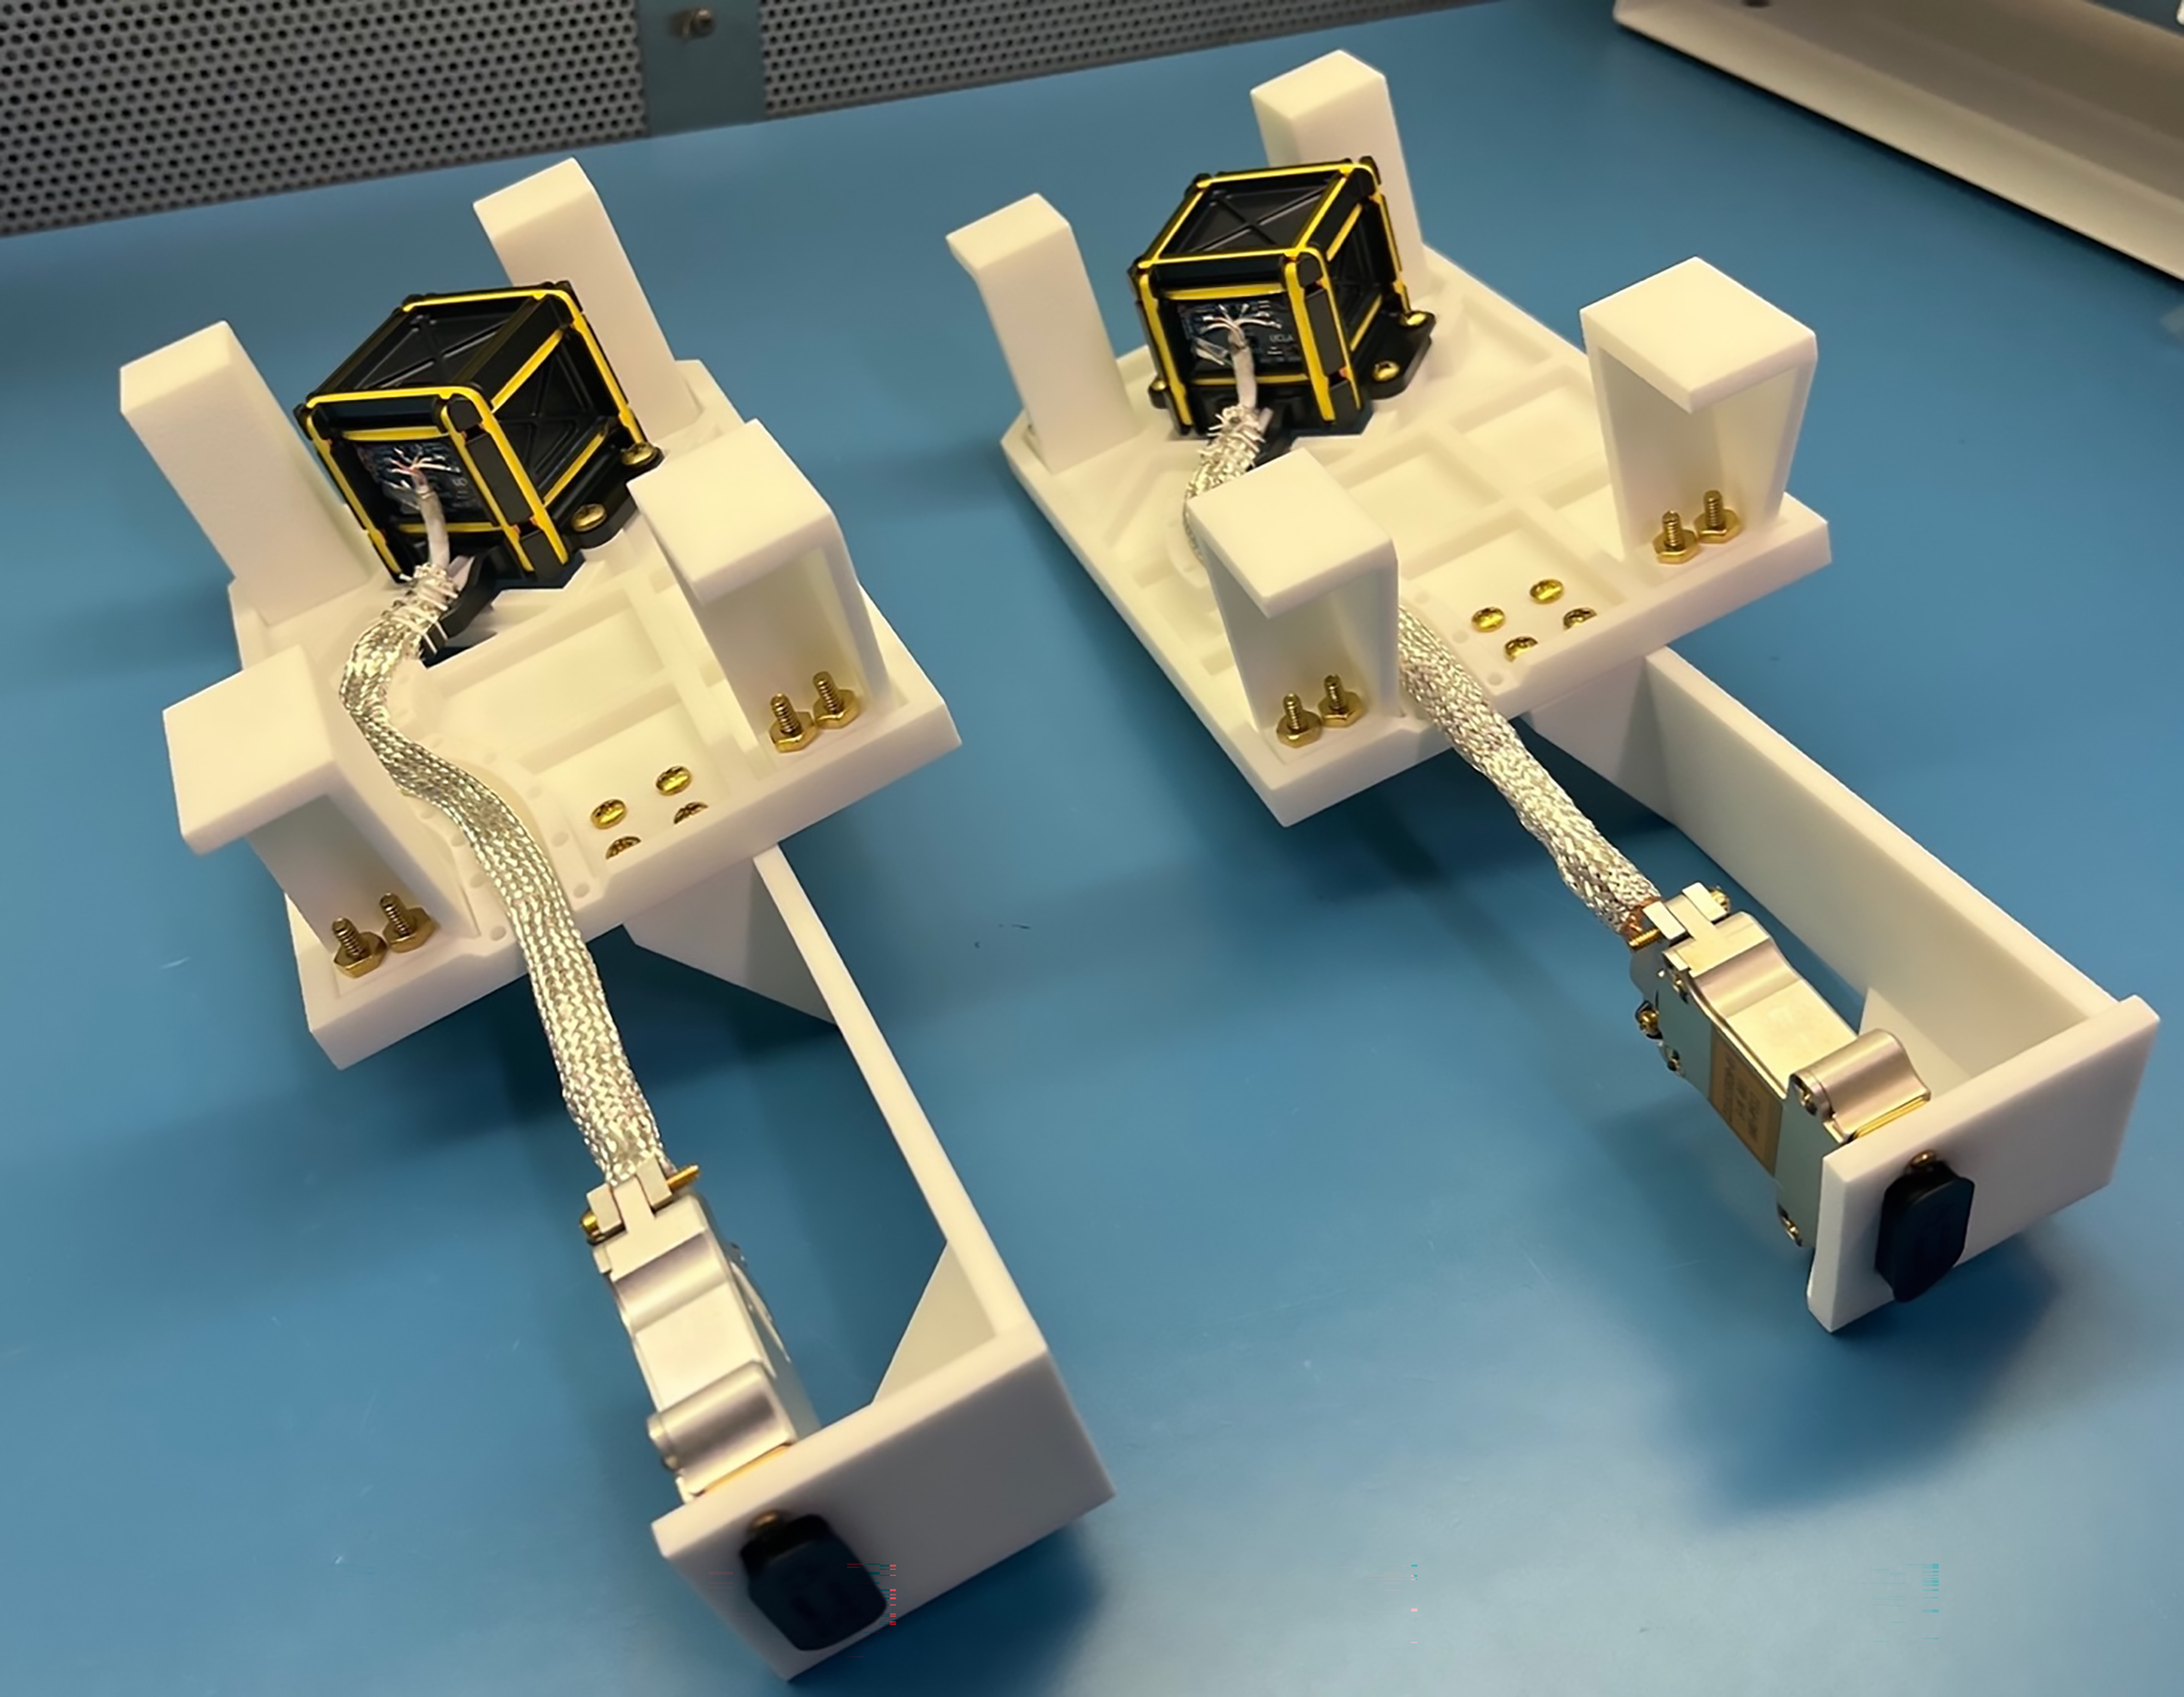 A photo of the two MAG flight model sensors